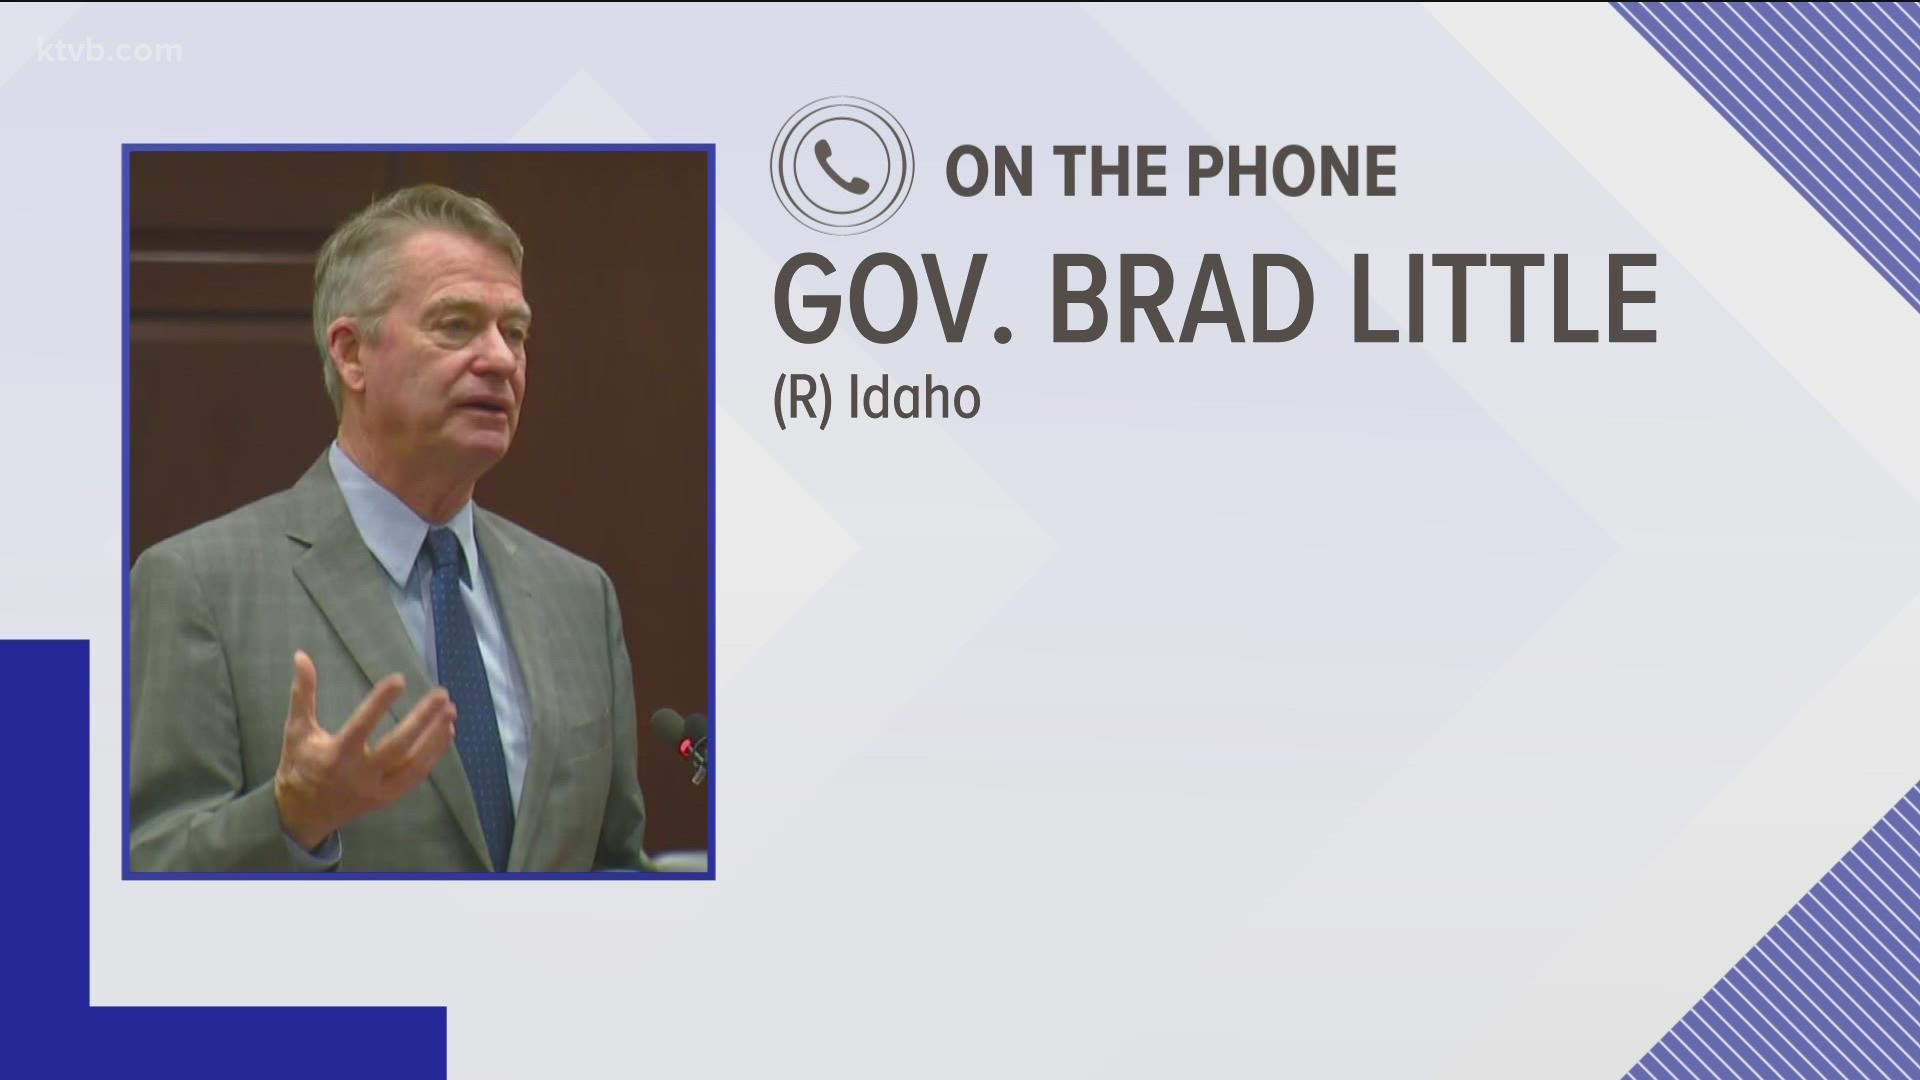 Gov. Brad Little emphasized his handling of the pandemic while imploring more residents of the state to put their trust in medical doctors and get the shot.